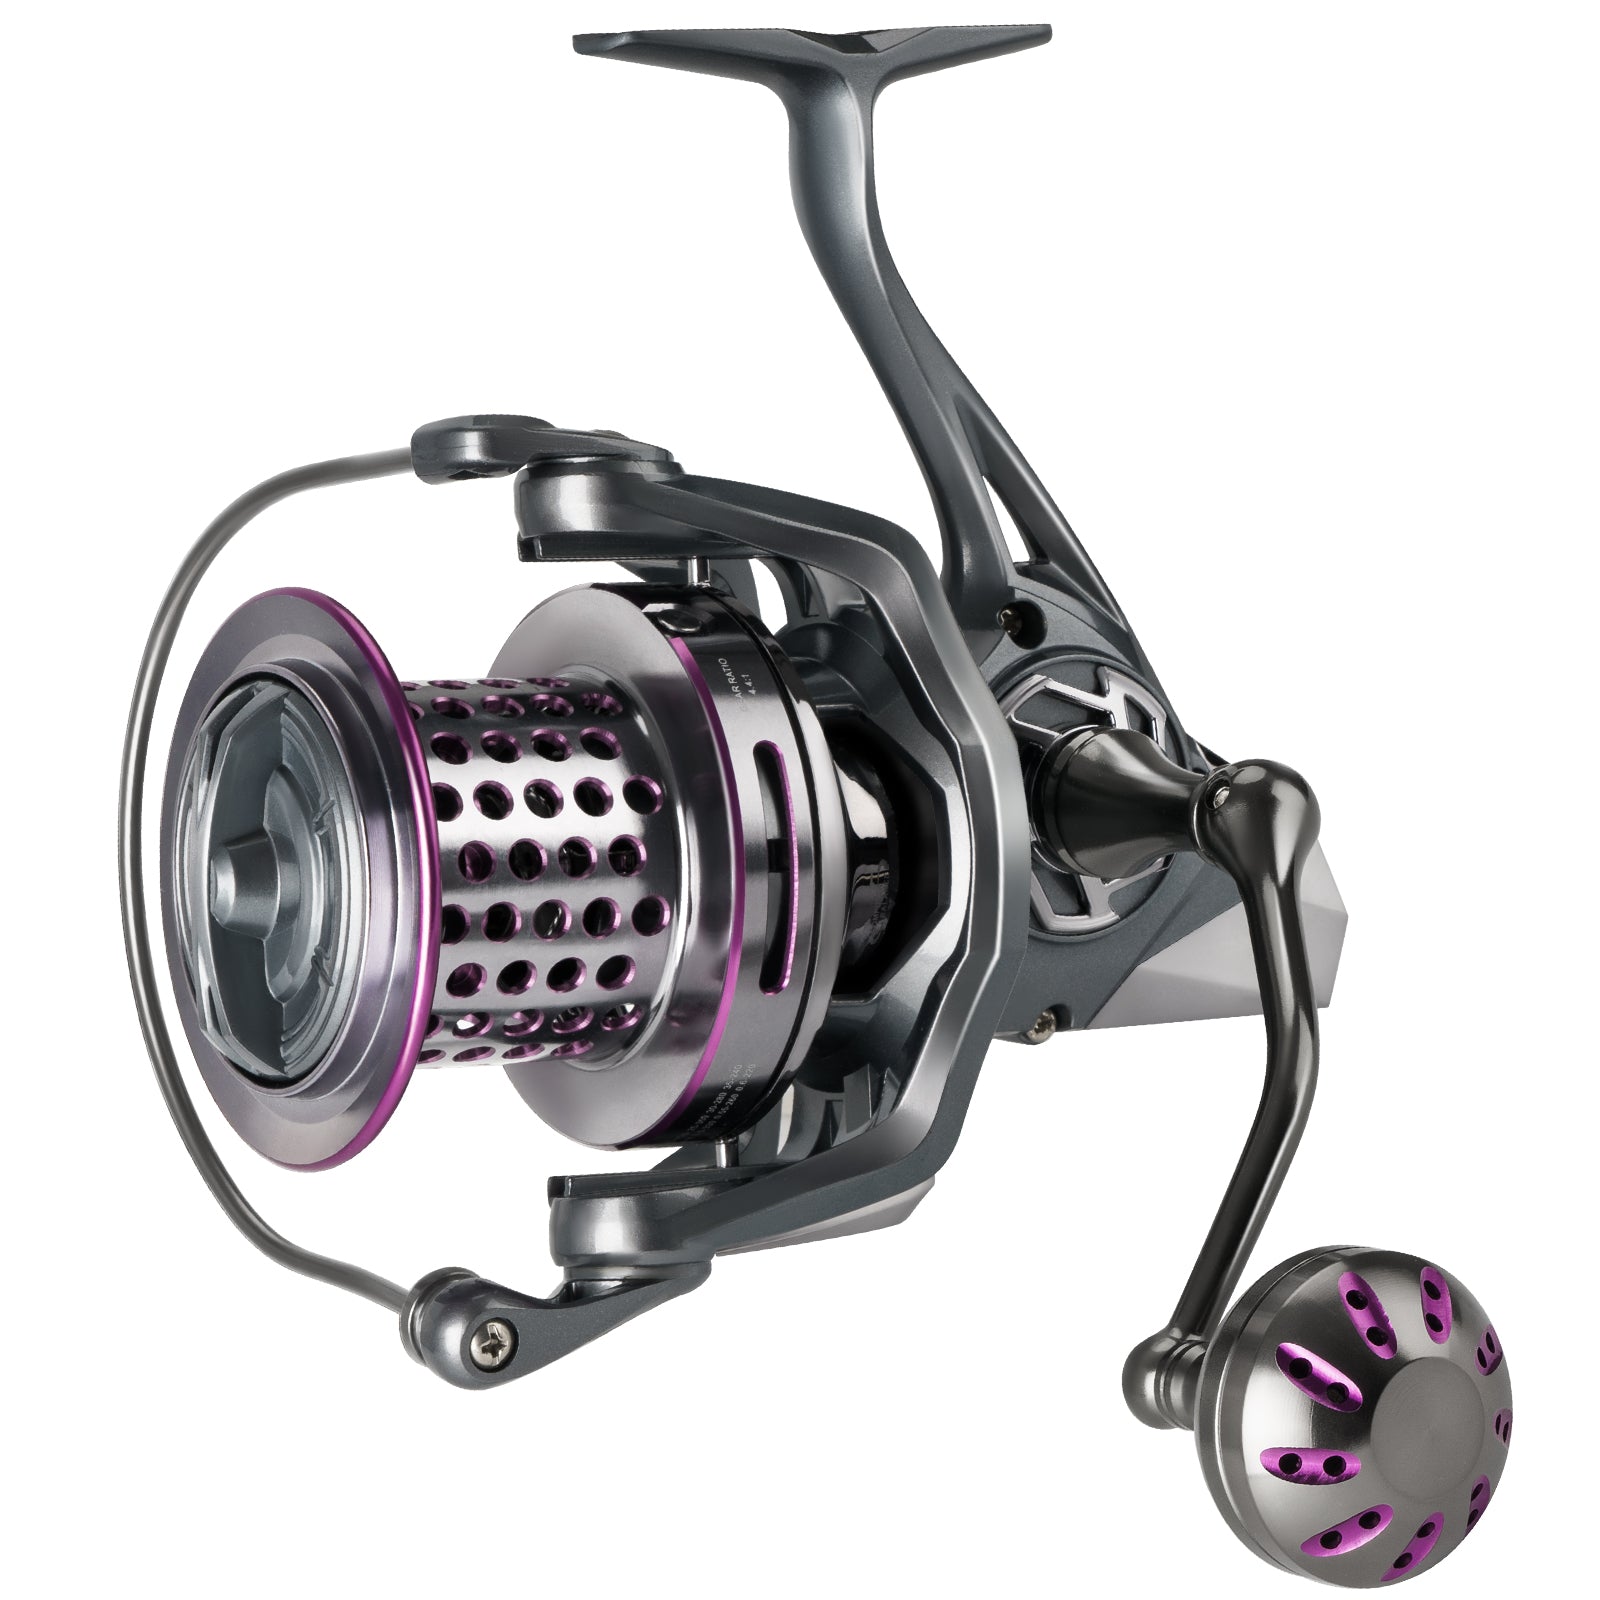 HPLIFE Surf Fishing Reel, Carbon Fiber Body Spinning Reel 10000 Long  Casting Ultra Smooth 12+1 Stainless BB, 68LBS Max Drag Power Saltwater  Ocean Offshore Fishing : Sports & Outdoors 